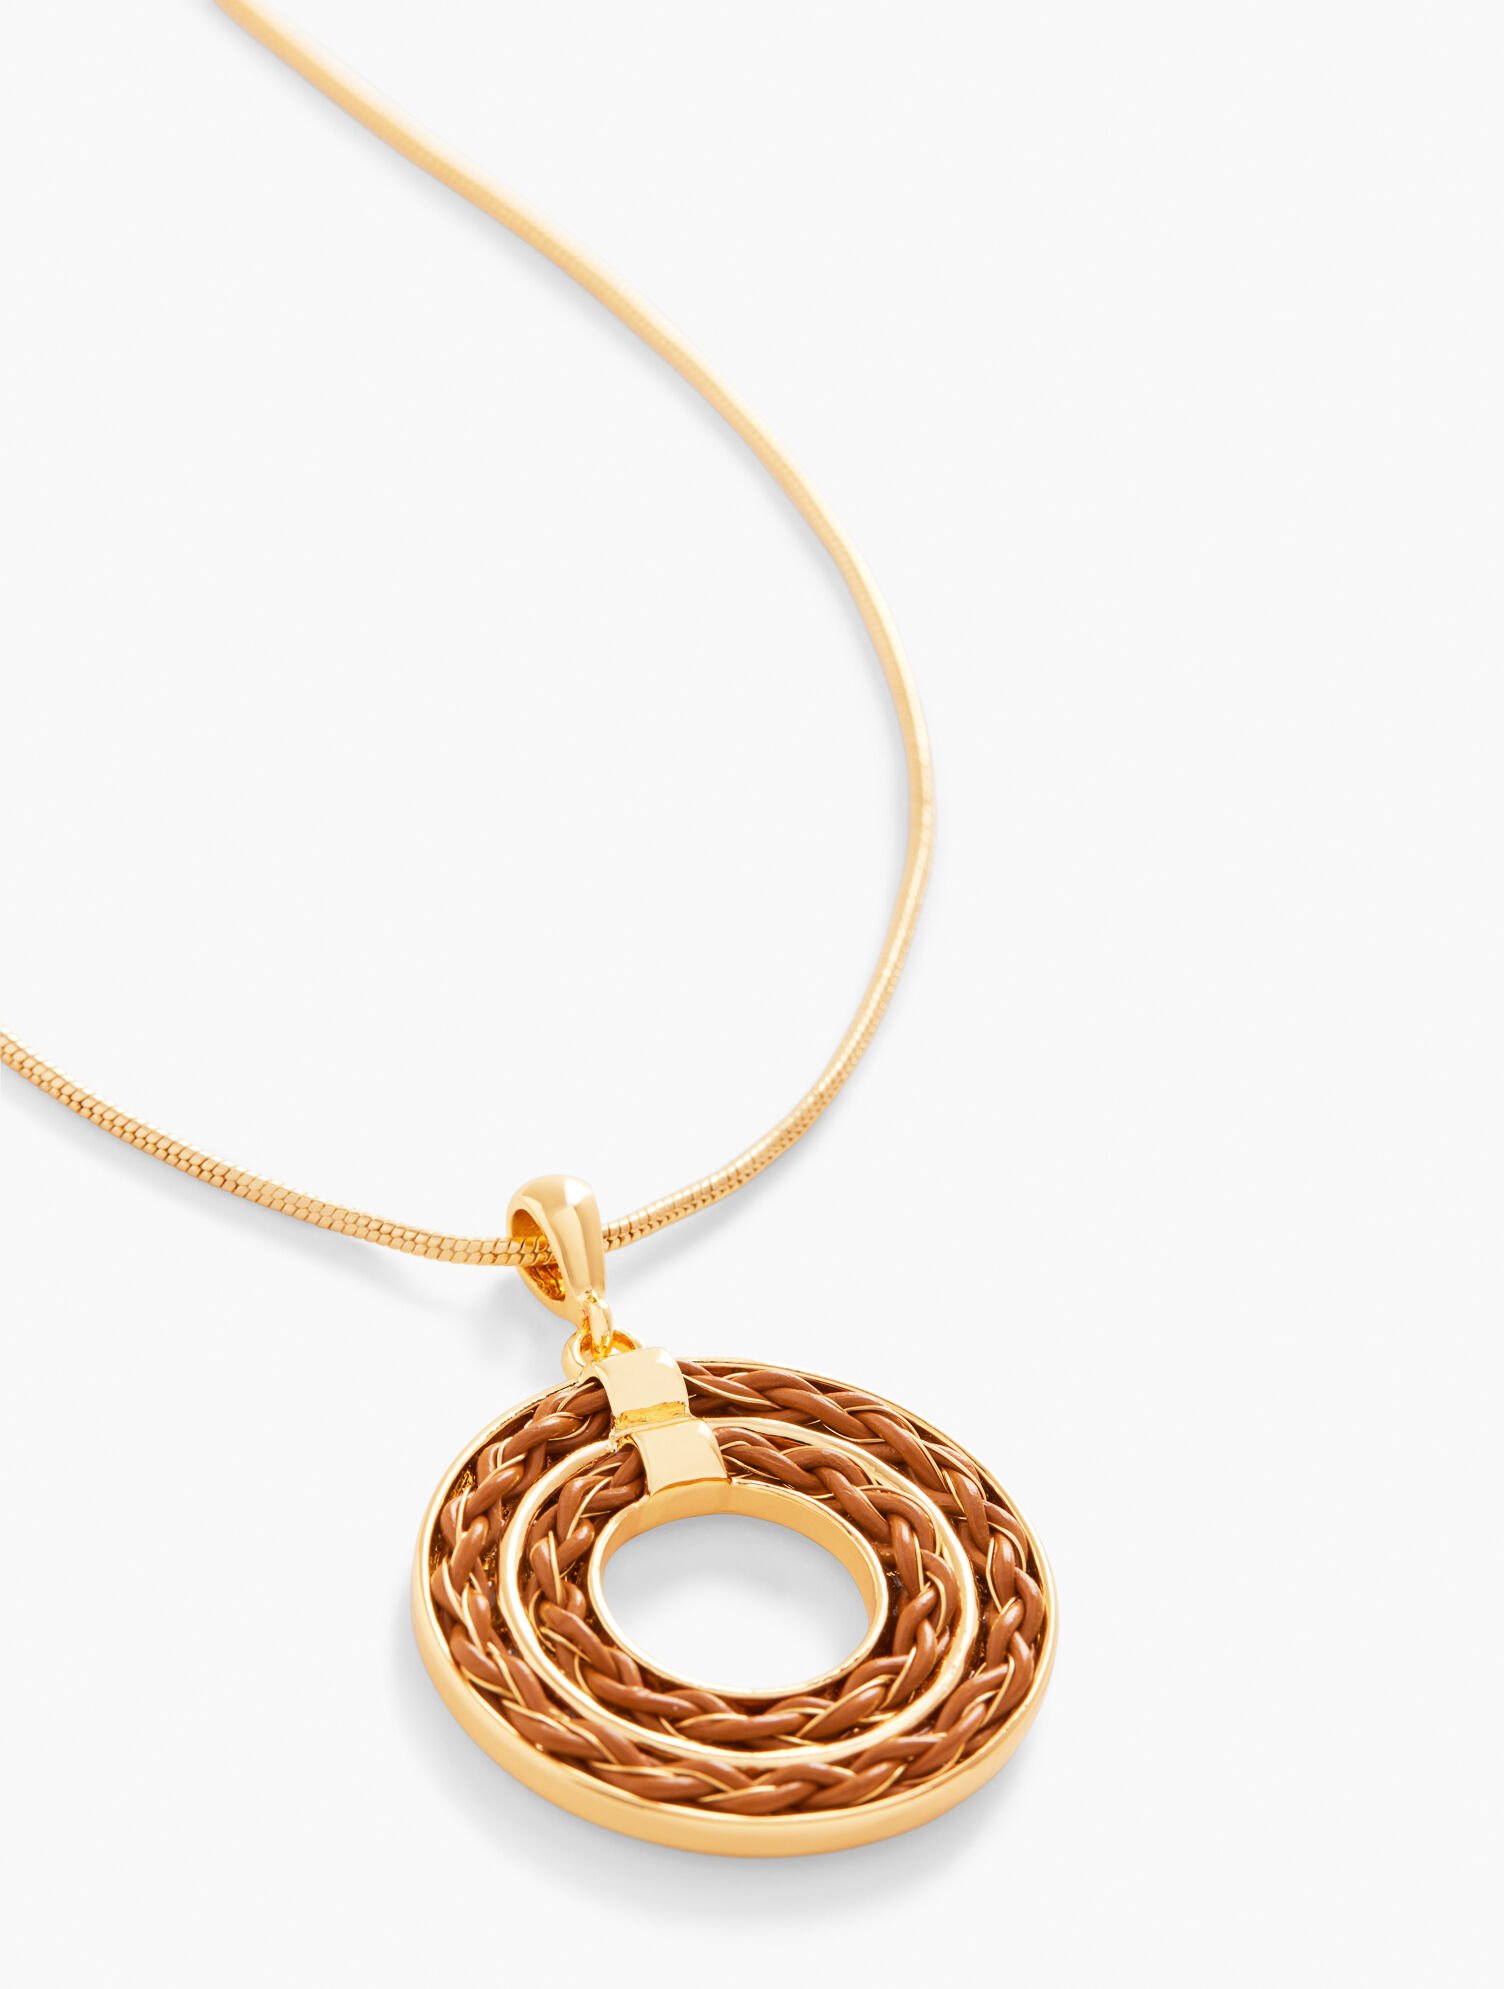 Braided Leather Pendant Necklace | Talbots